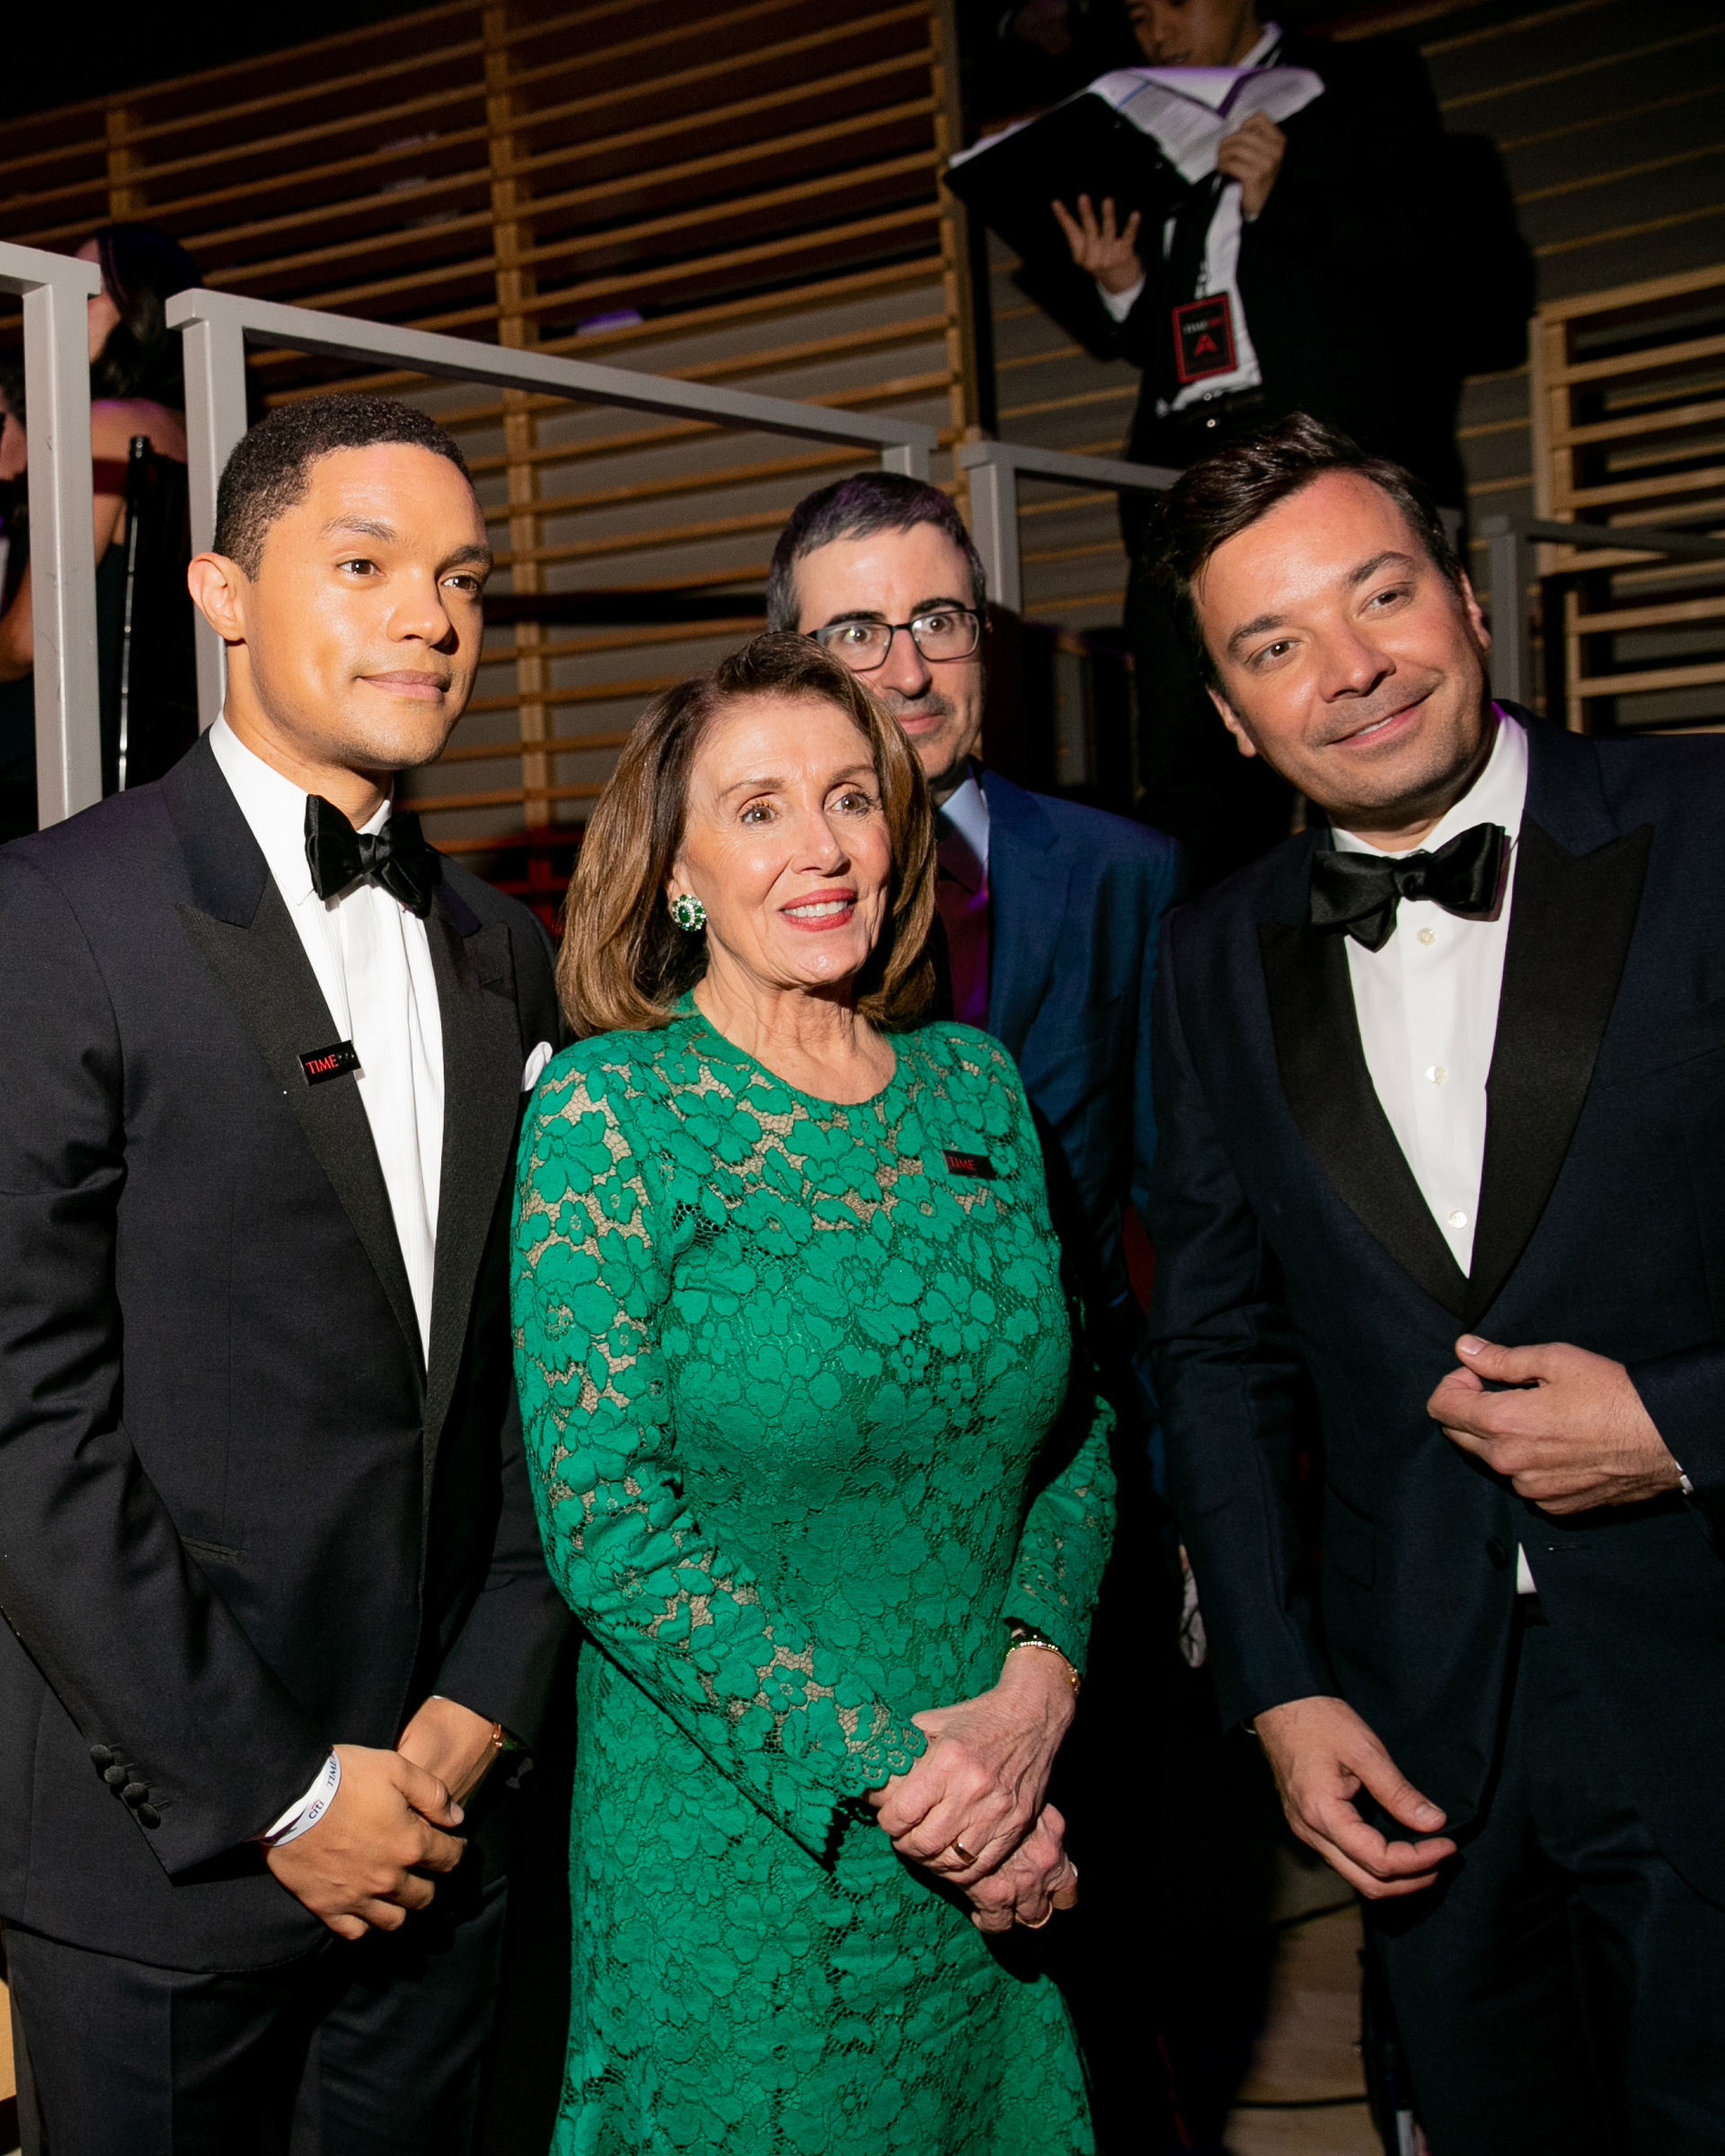 Trevor Noah, Nancy Pelosi, John Oliver and Jimmy Fallon at the Time 100 Gala at Jazz at Lincoln Center in New York City on April 23, 2019. (Kevin Tachman for TIME)